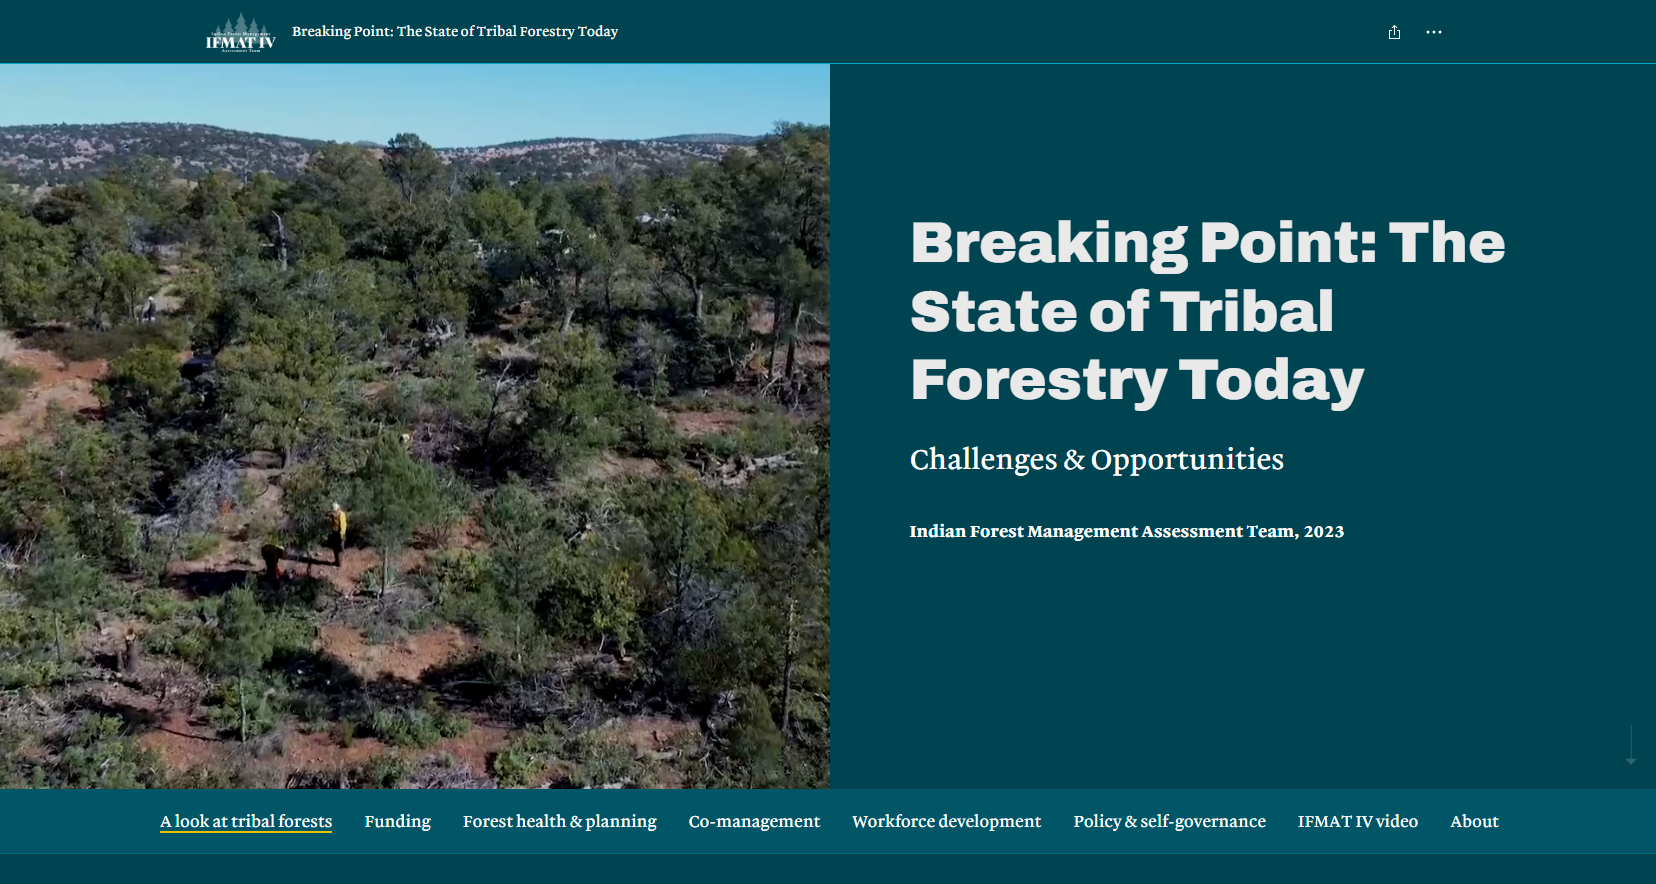 Learn More about Tribal Forestry with this Interactive, Multimedia Story Map